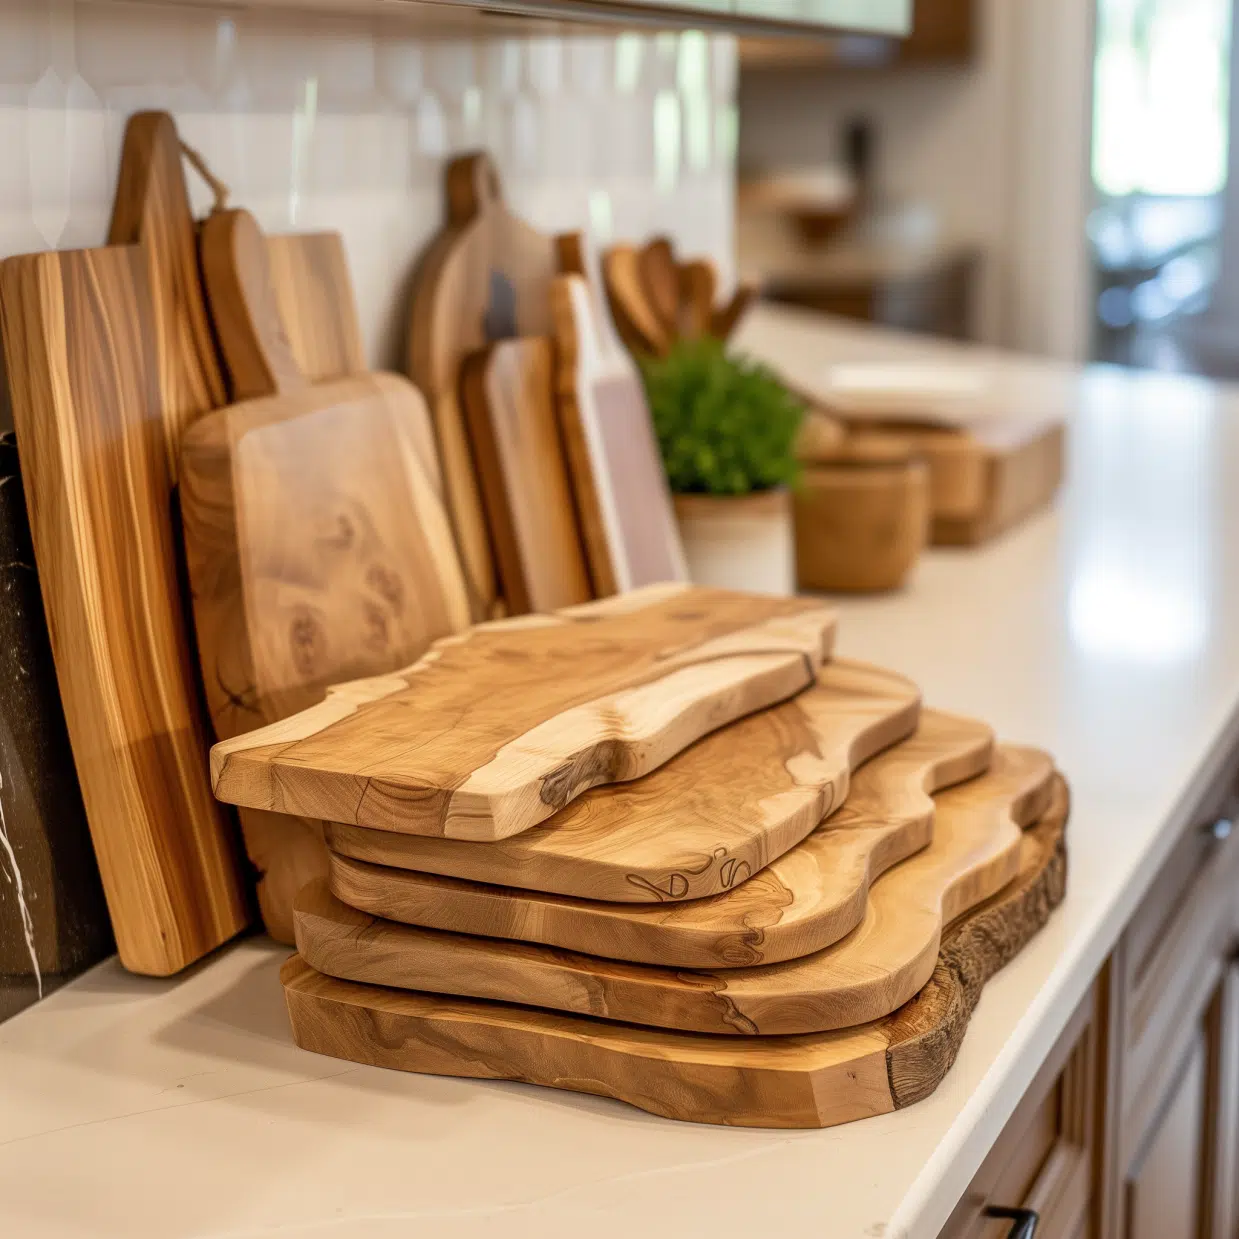 a stack of natural wood cutting boards neatly arranged on a kitchen counter, showcasing the warmth and organic beauty of the wood.